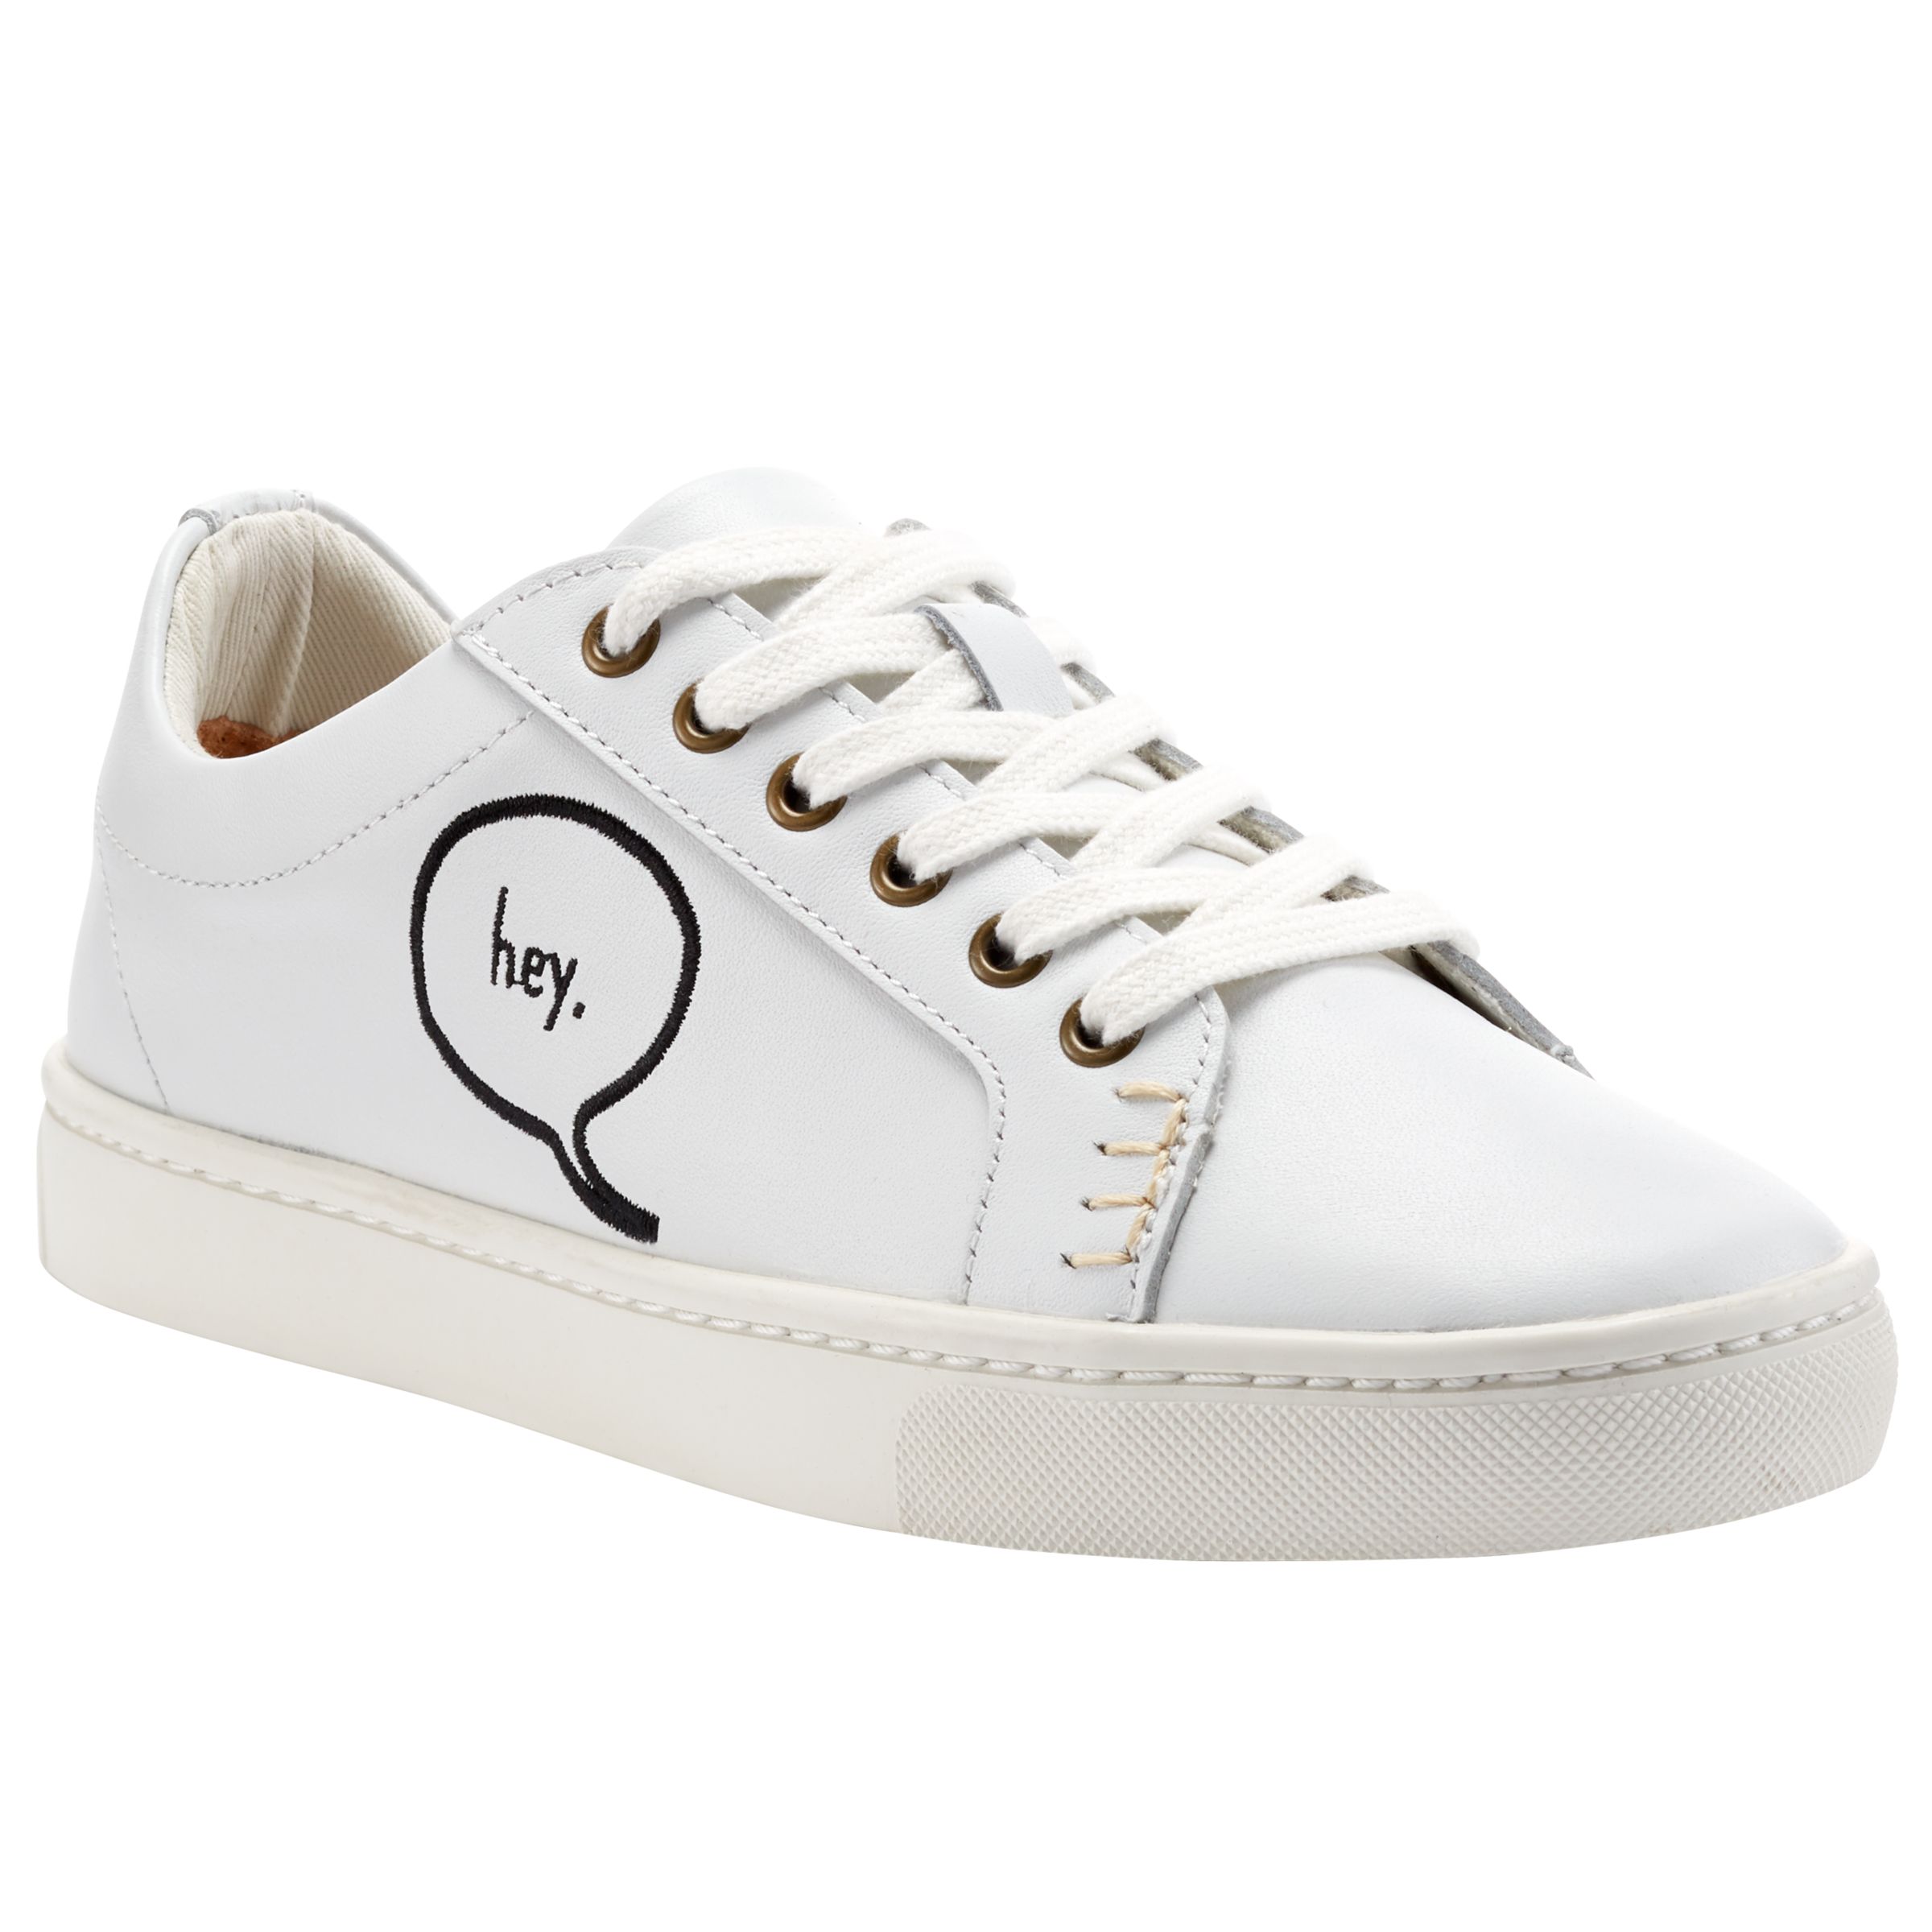 Soludos Embroidered Lace-Up Trainers, White, 5